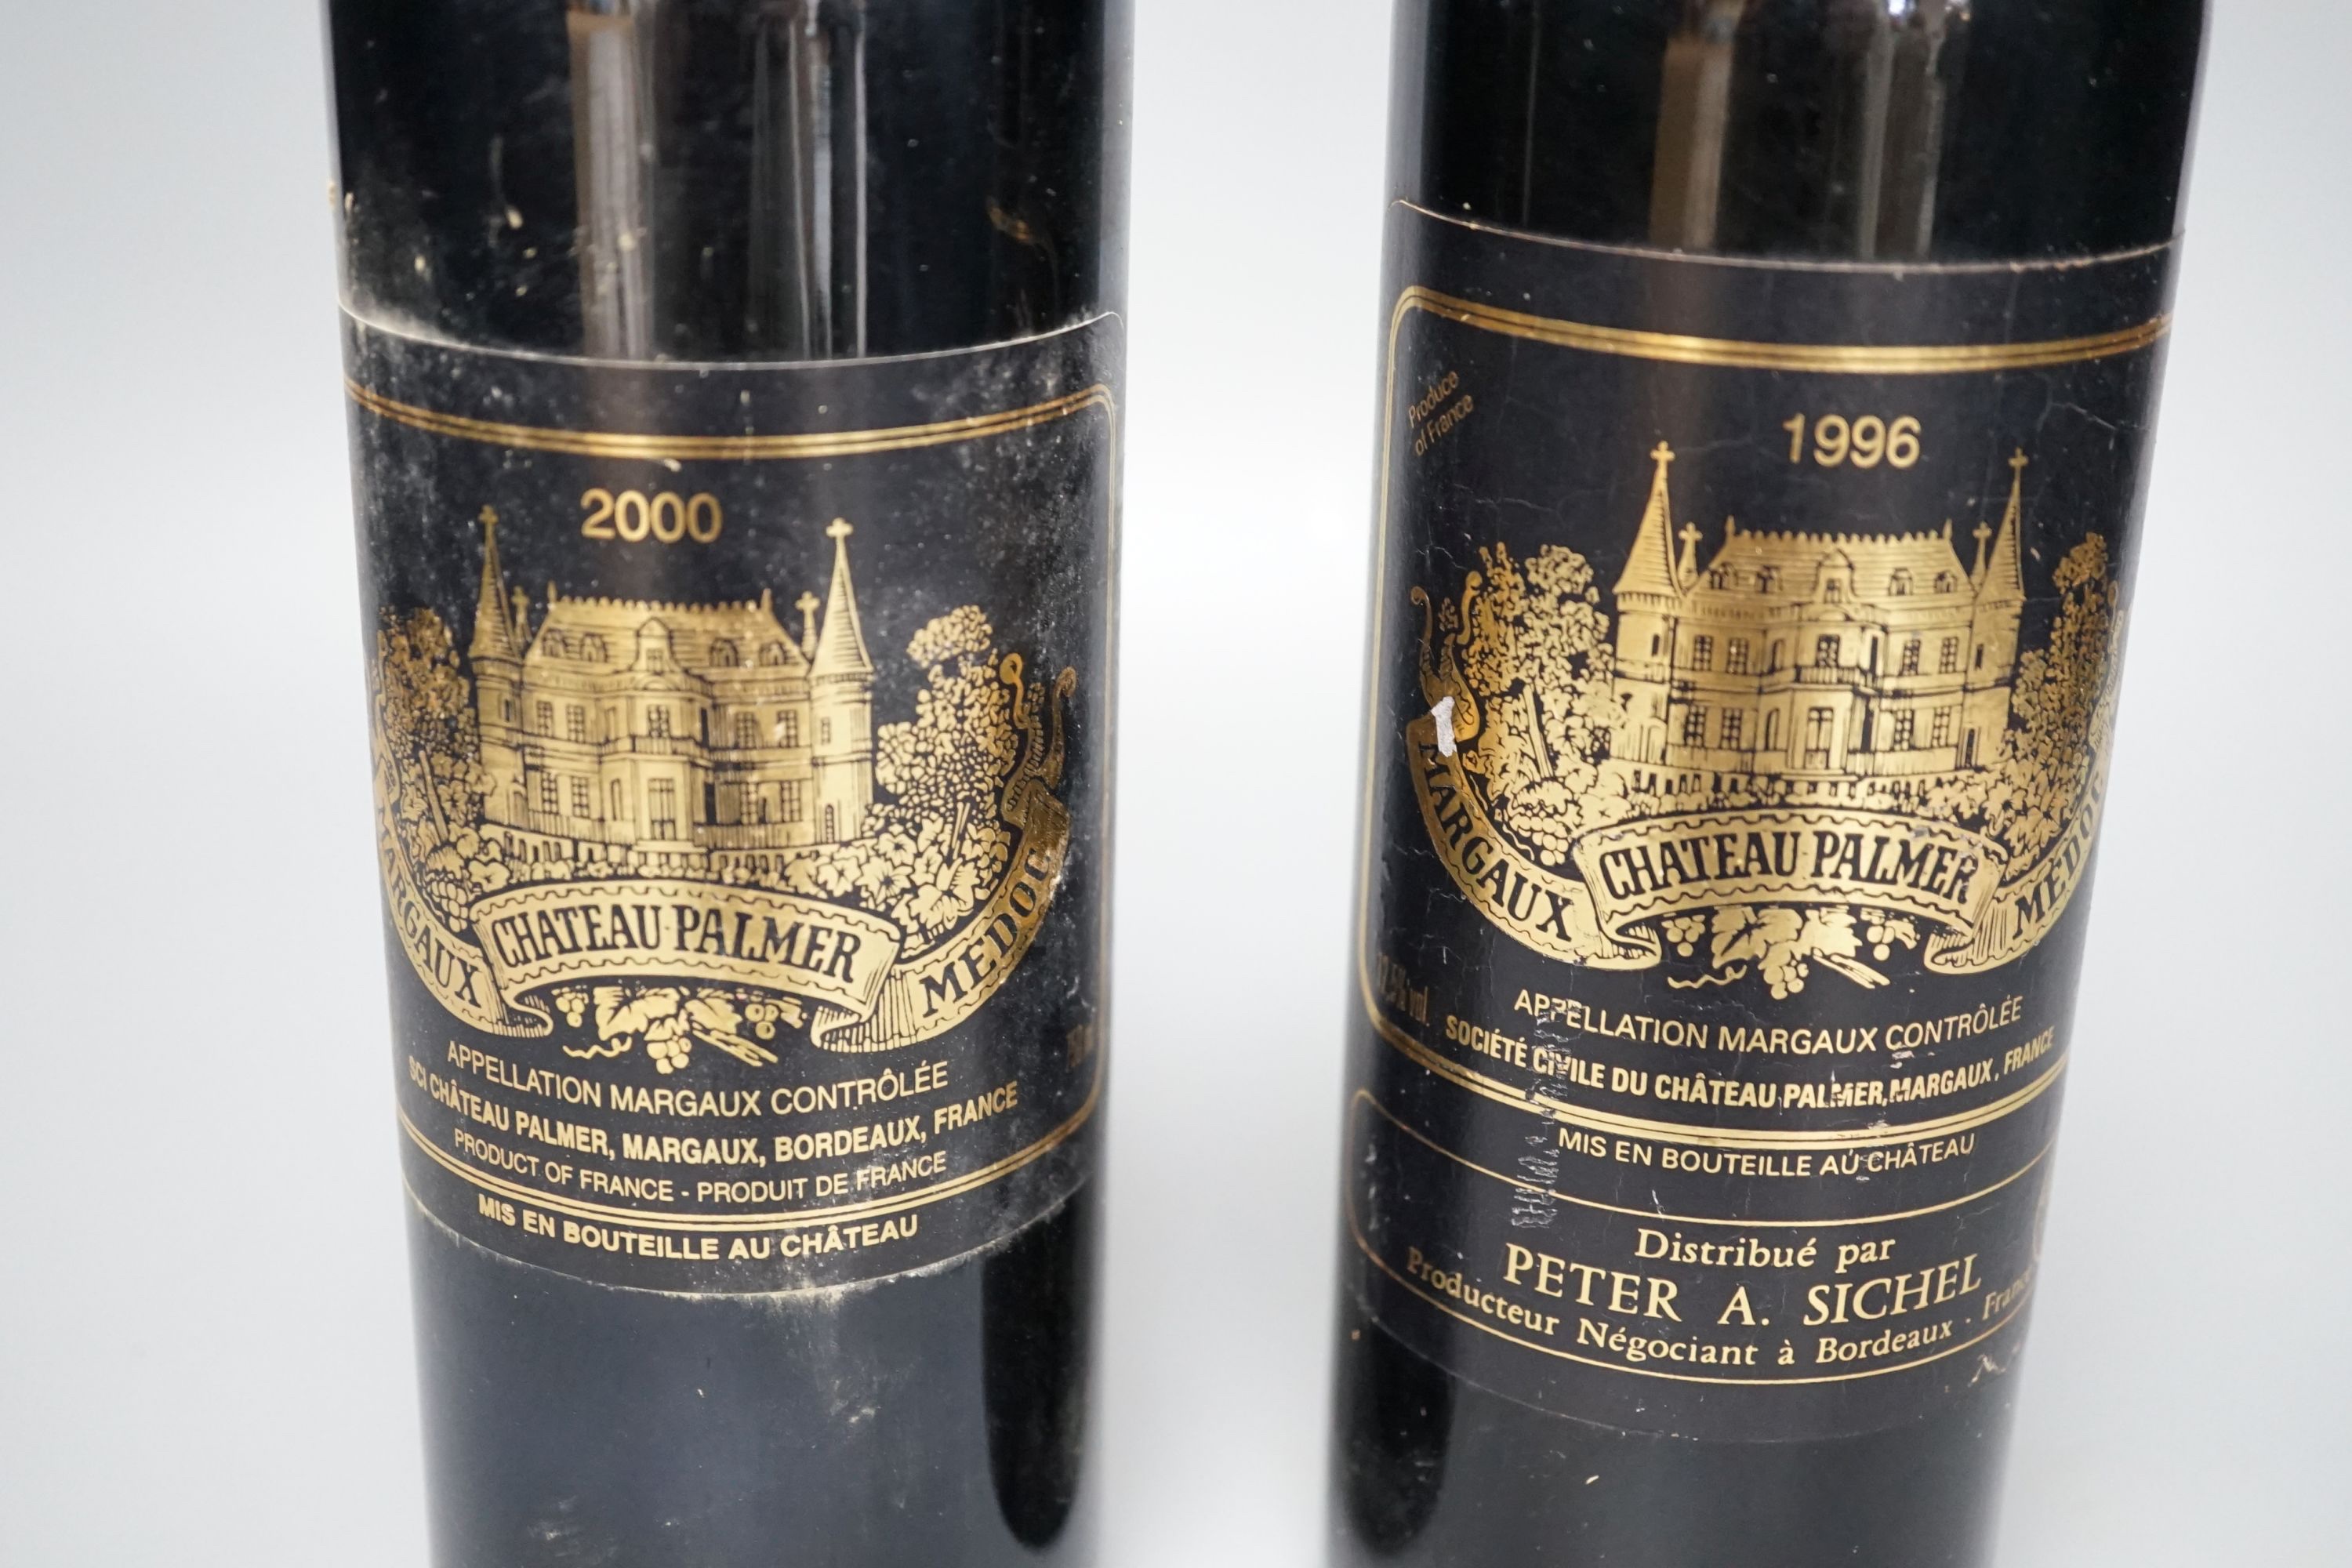 Chateau Palmer Margaux Medoc - 2 bottles, 1996 and 2000